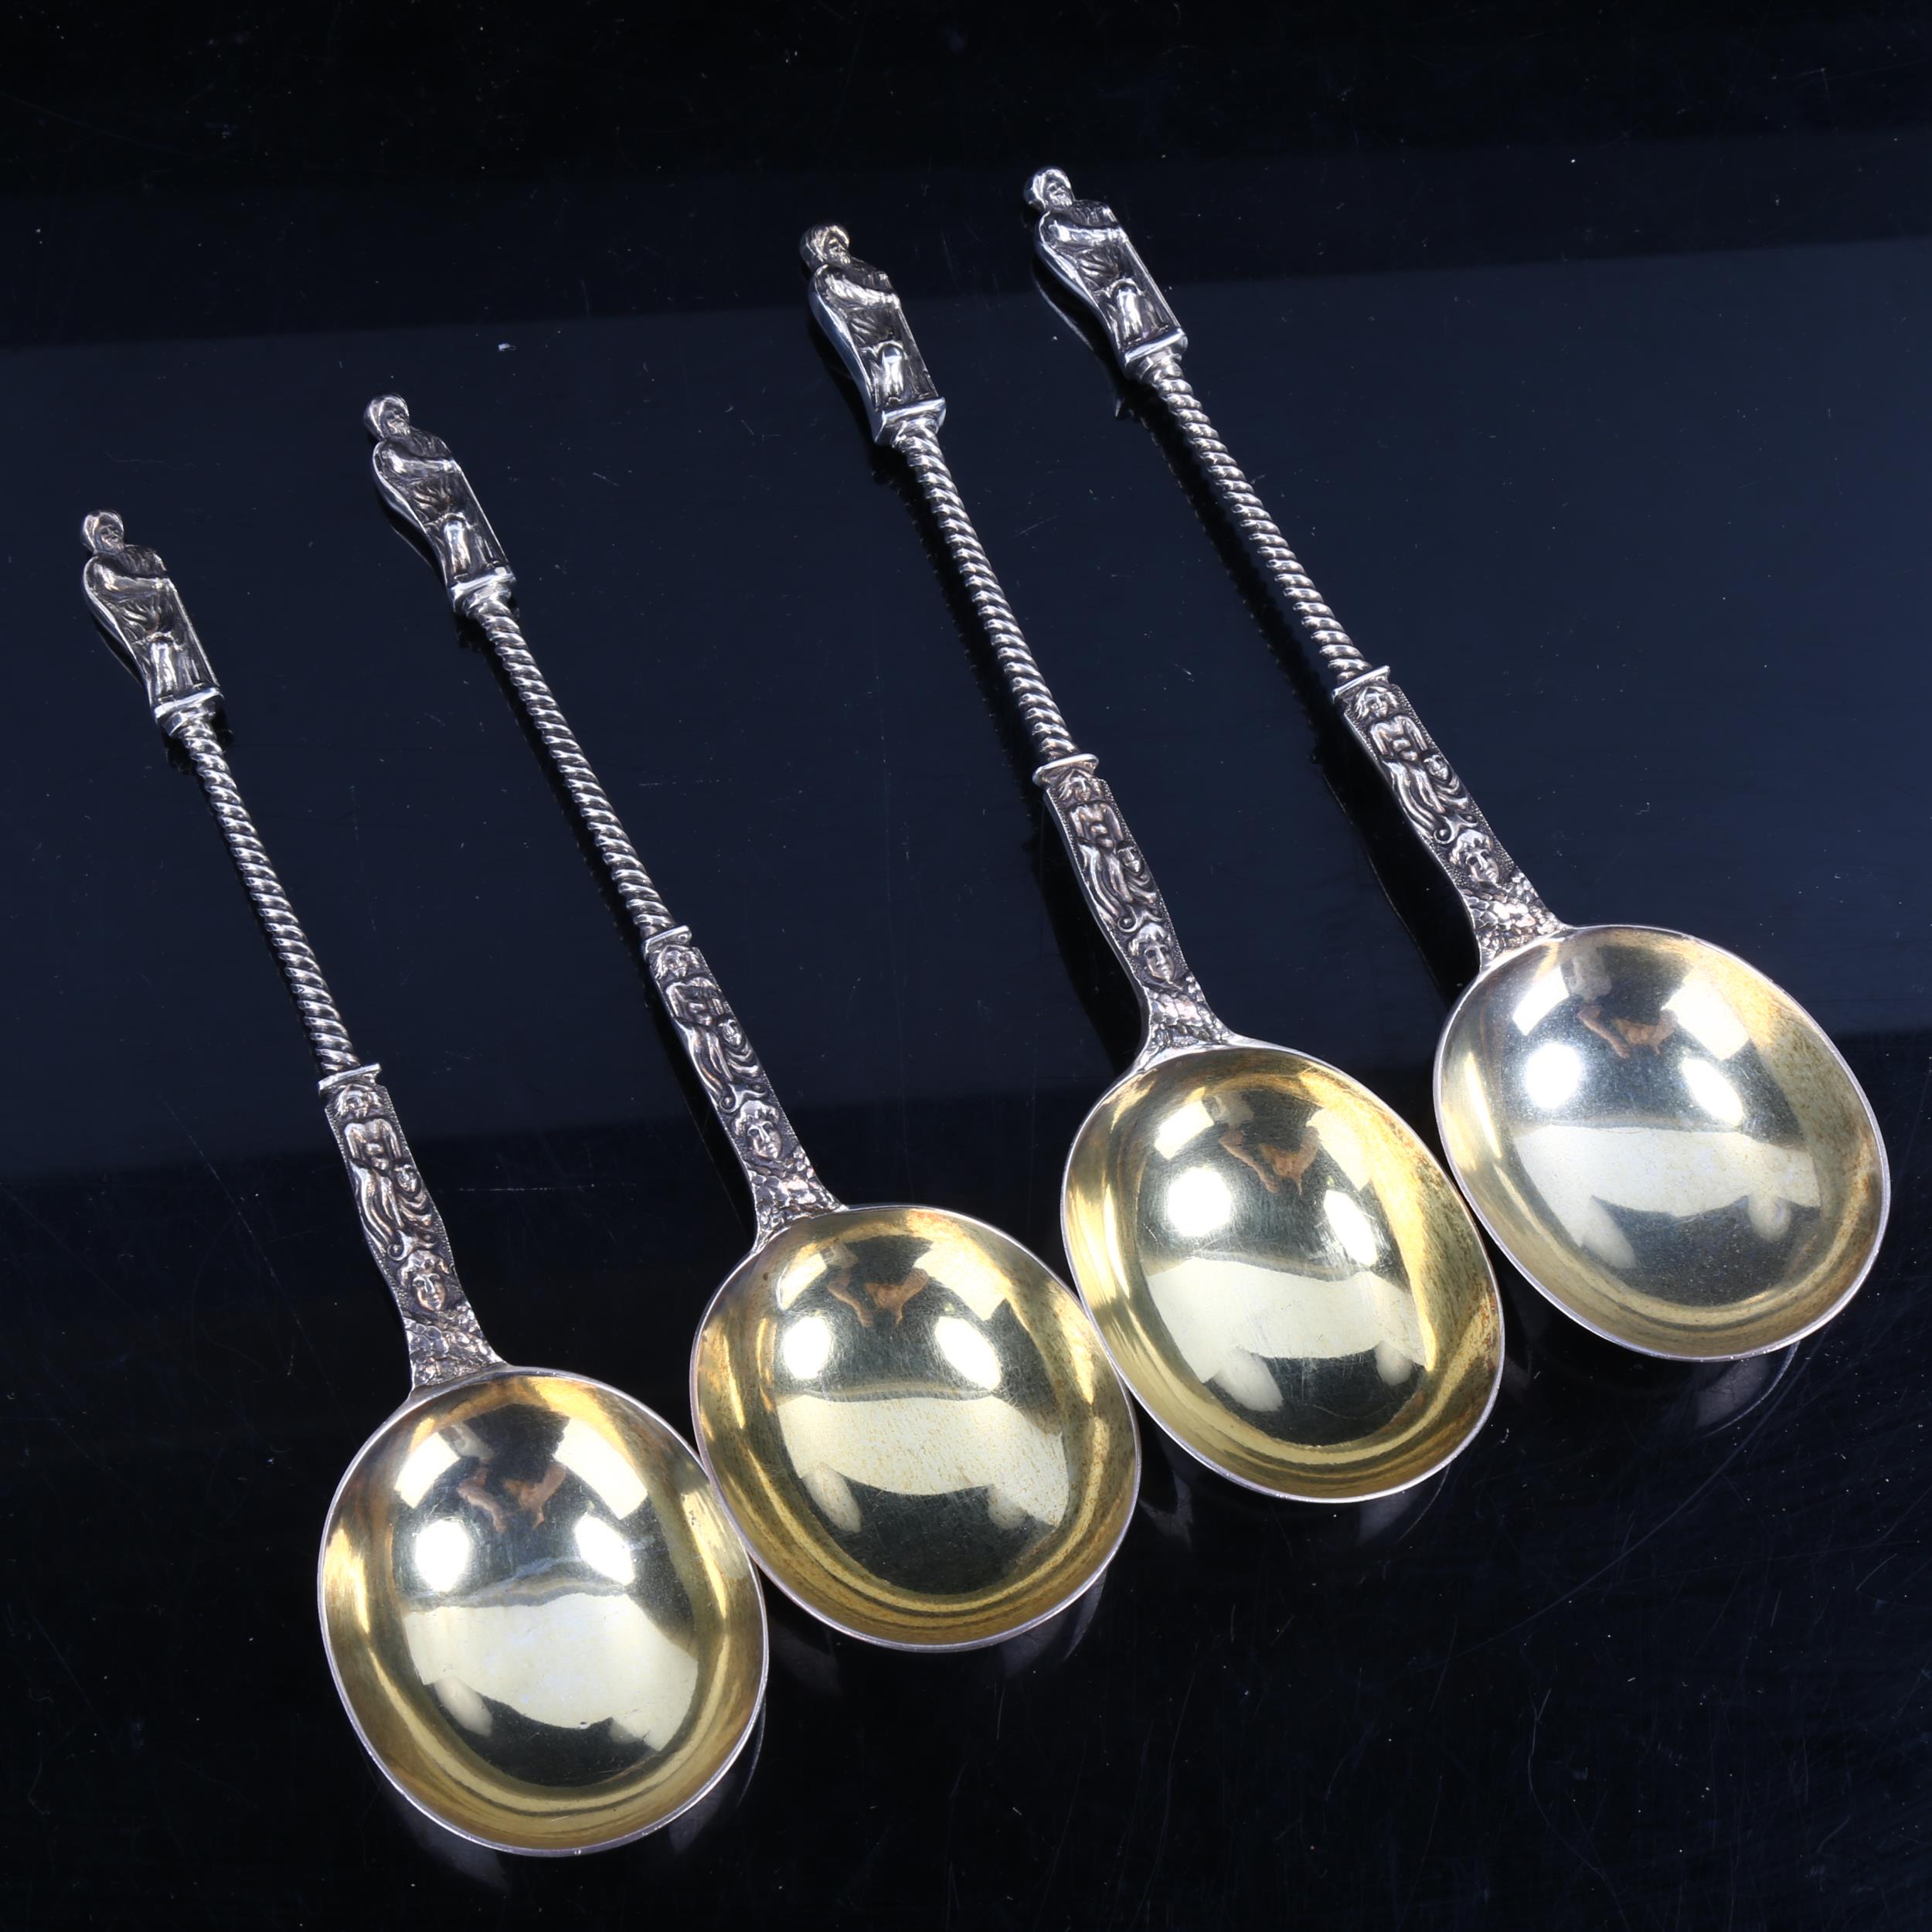 A set of 4 Victorian silver Apostle spoons, with twisted stems and gilded bowls, by Henry John